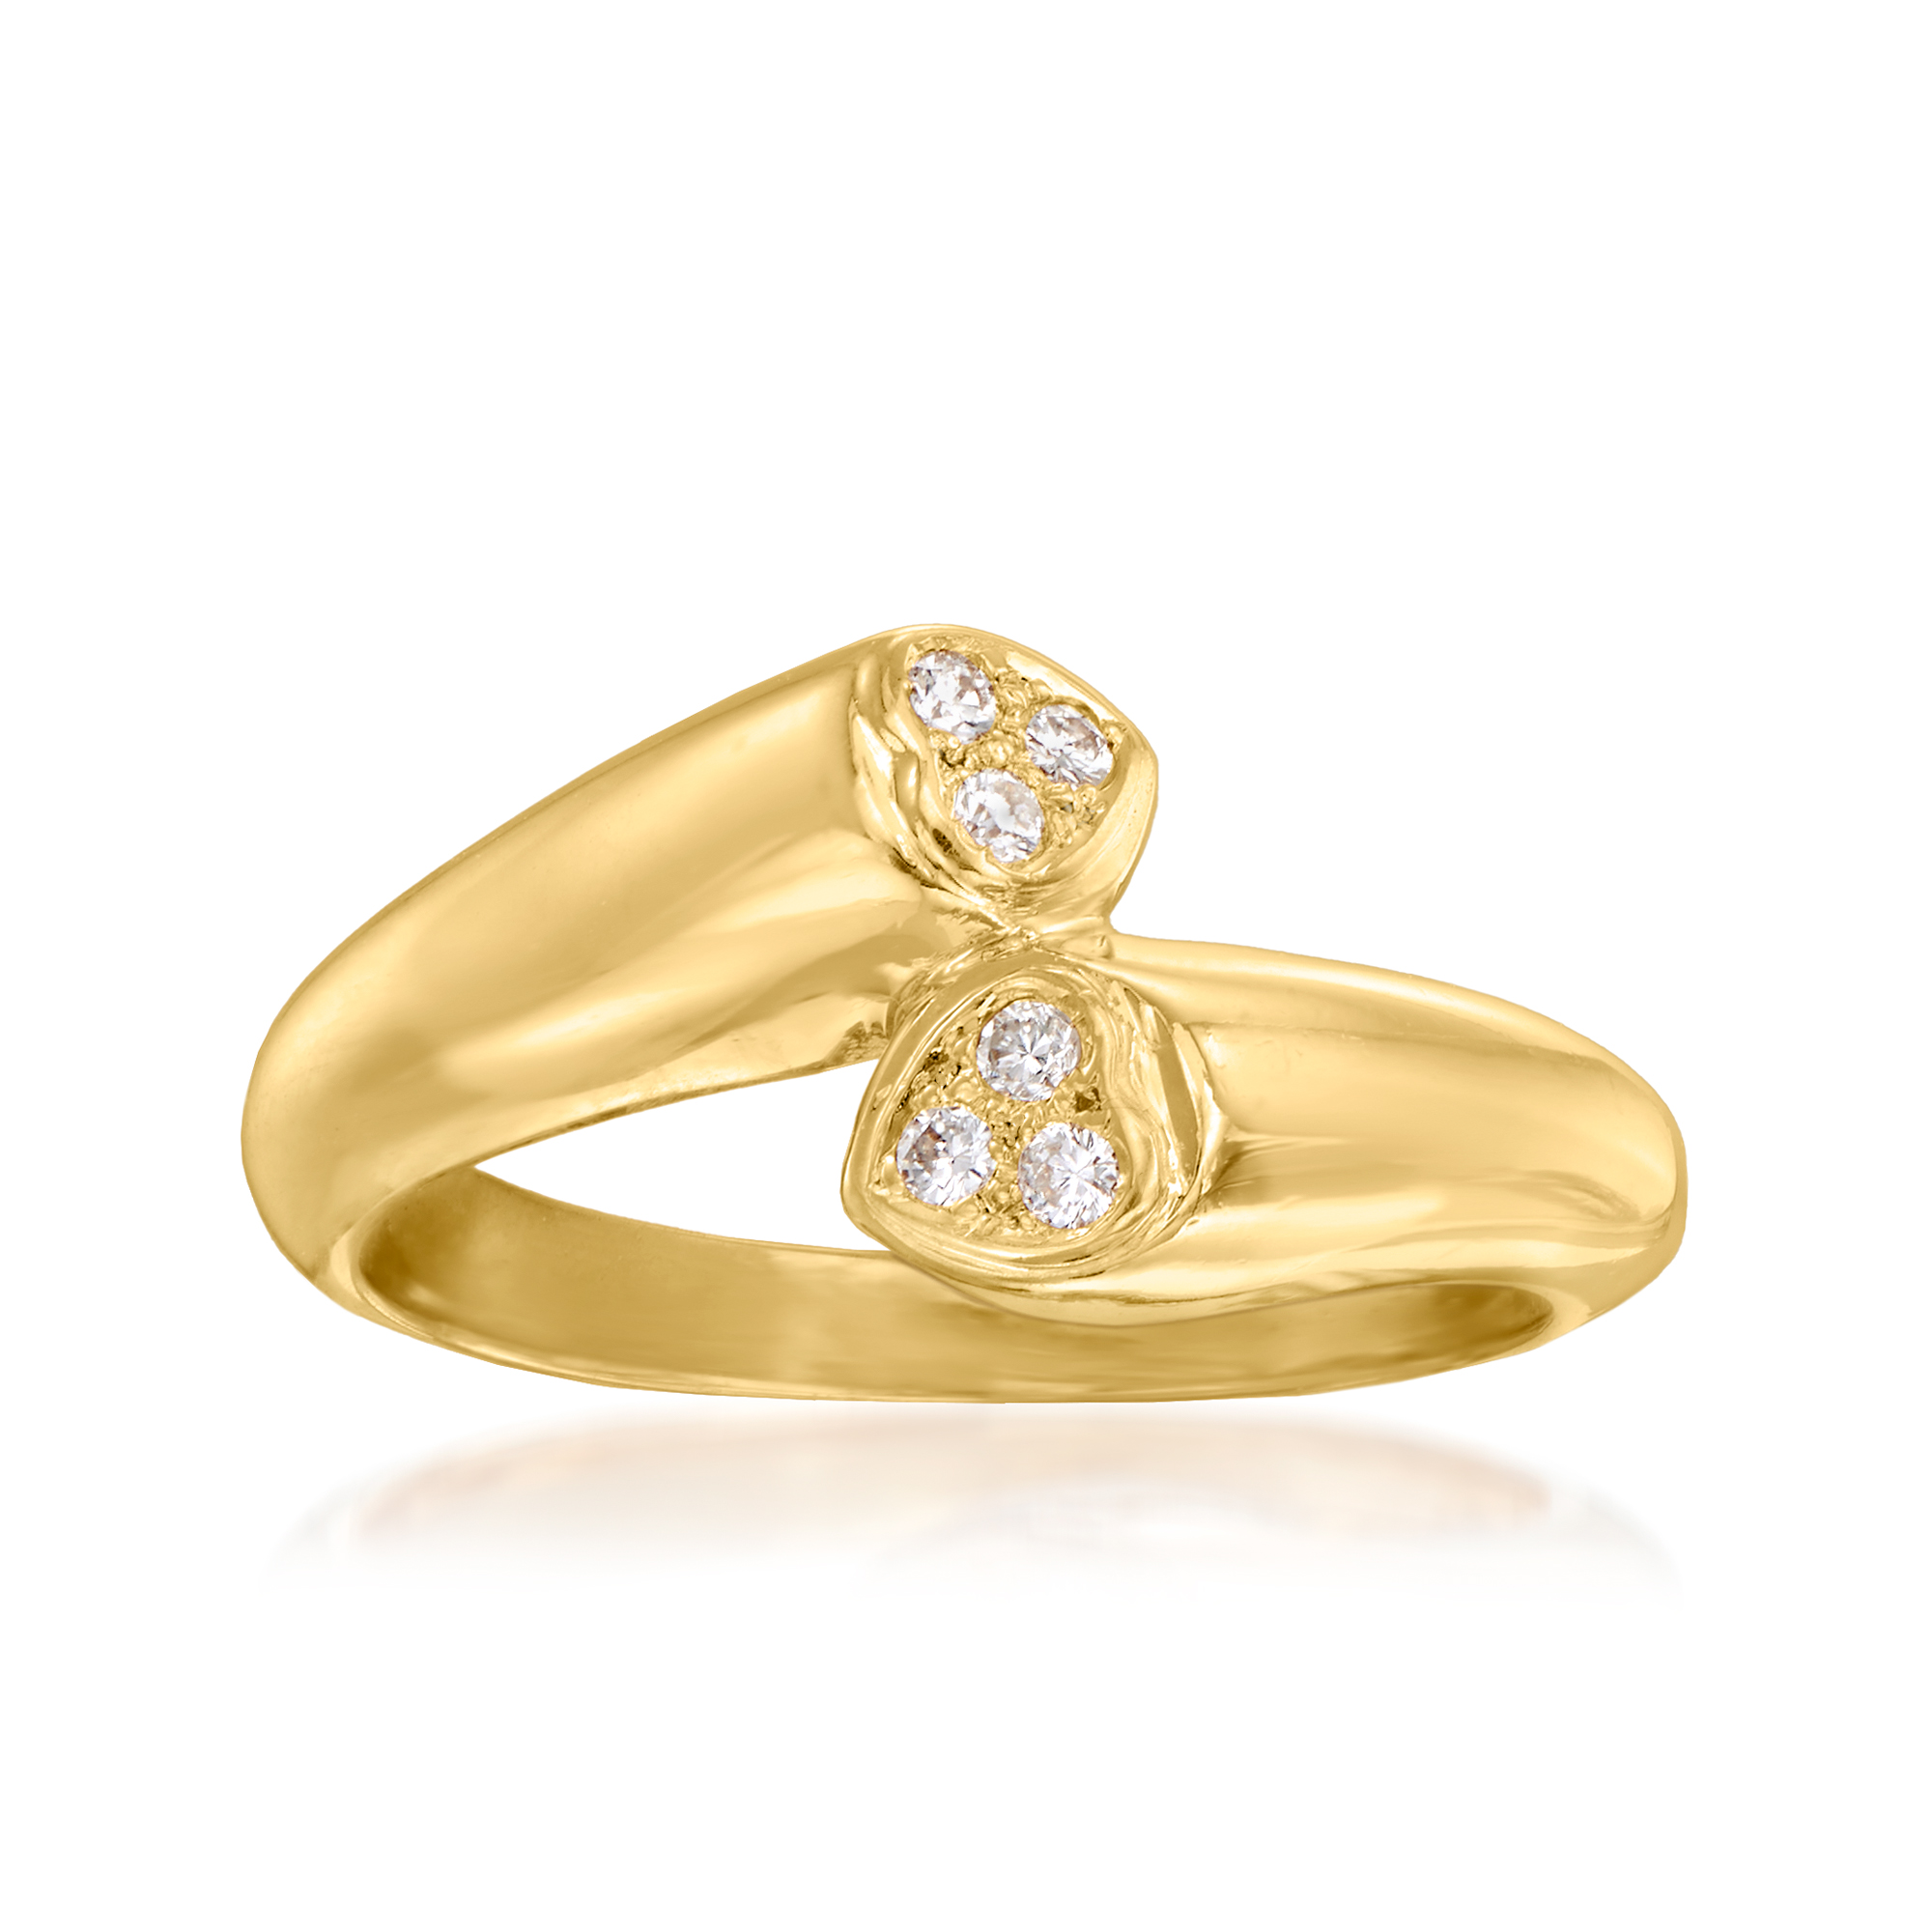 C. 1980 Vintage Cartier .12 ct. t.w. Diamond Heart Ring in 18kt Yellow Gold  | Ross-Simons